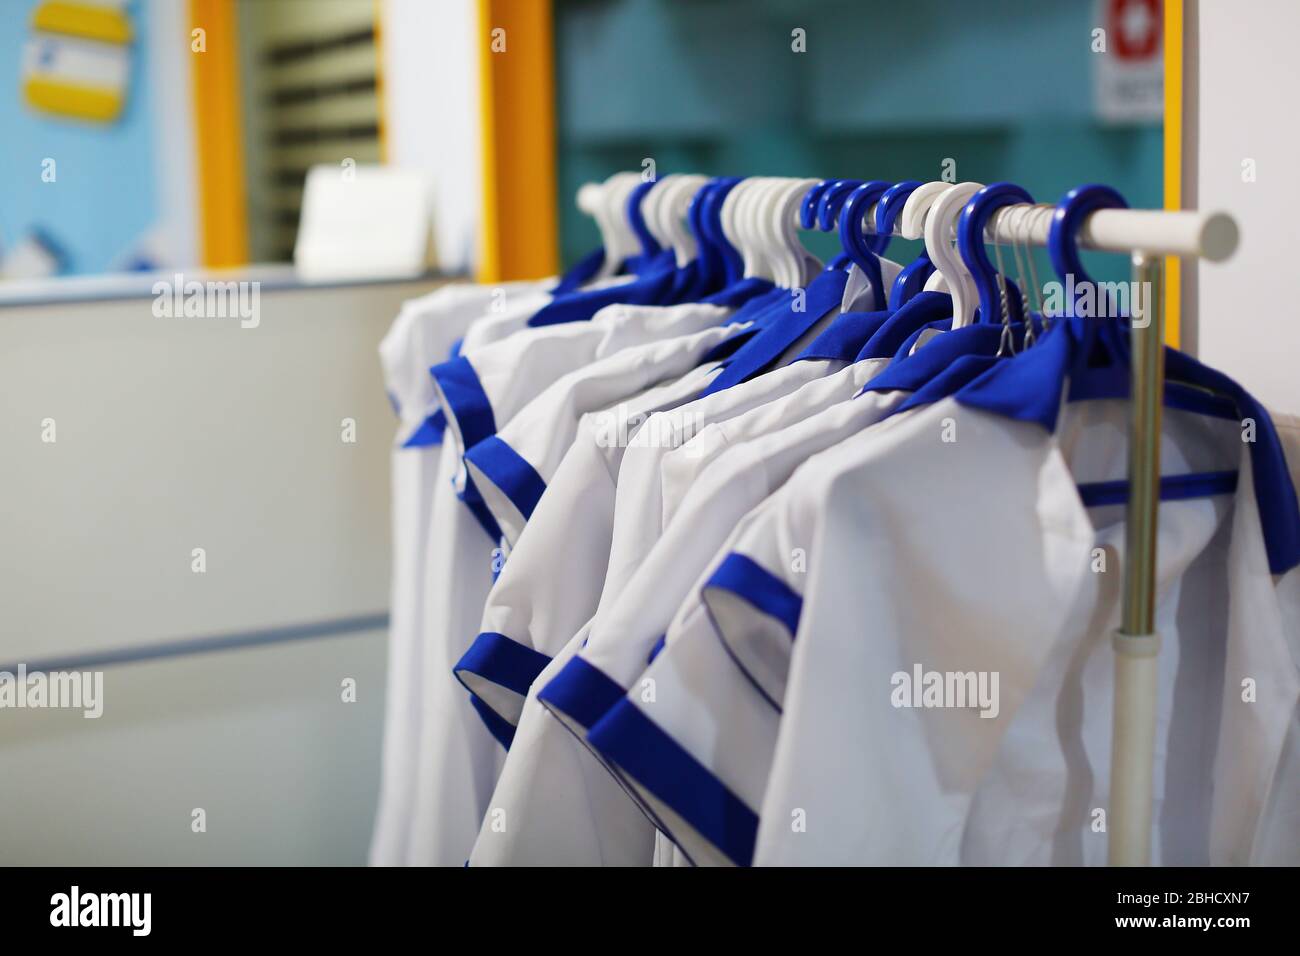 Hanger stand with medical uniform gowns. Medical or laboratory concept Stock Photo